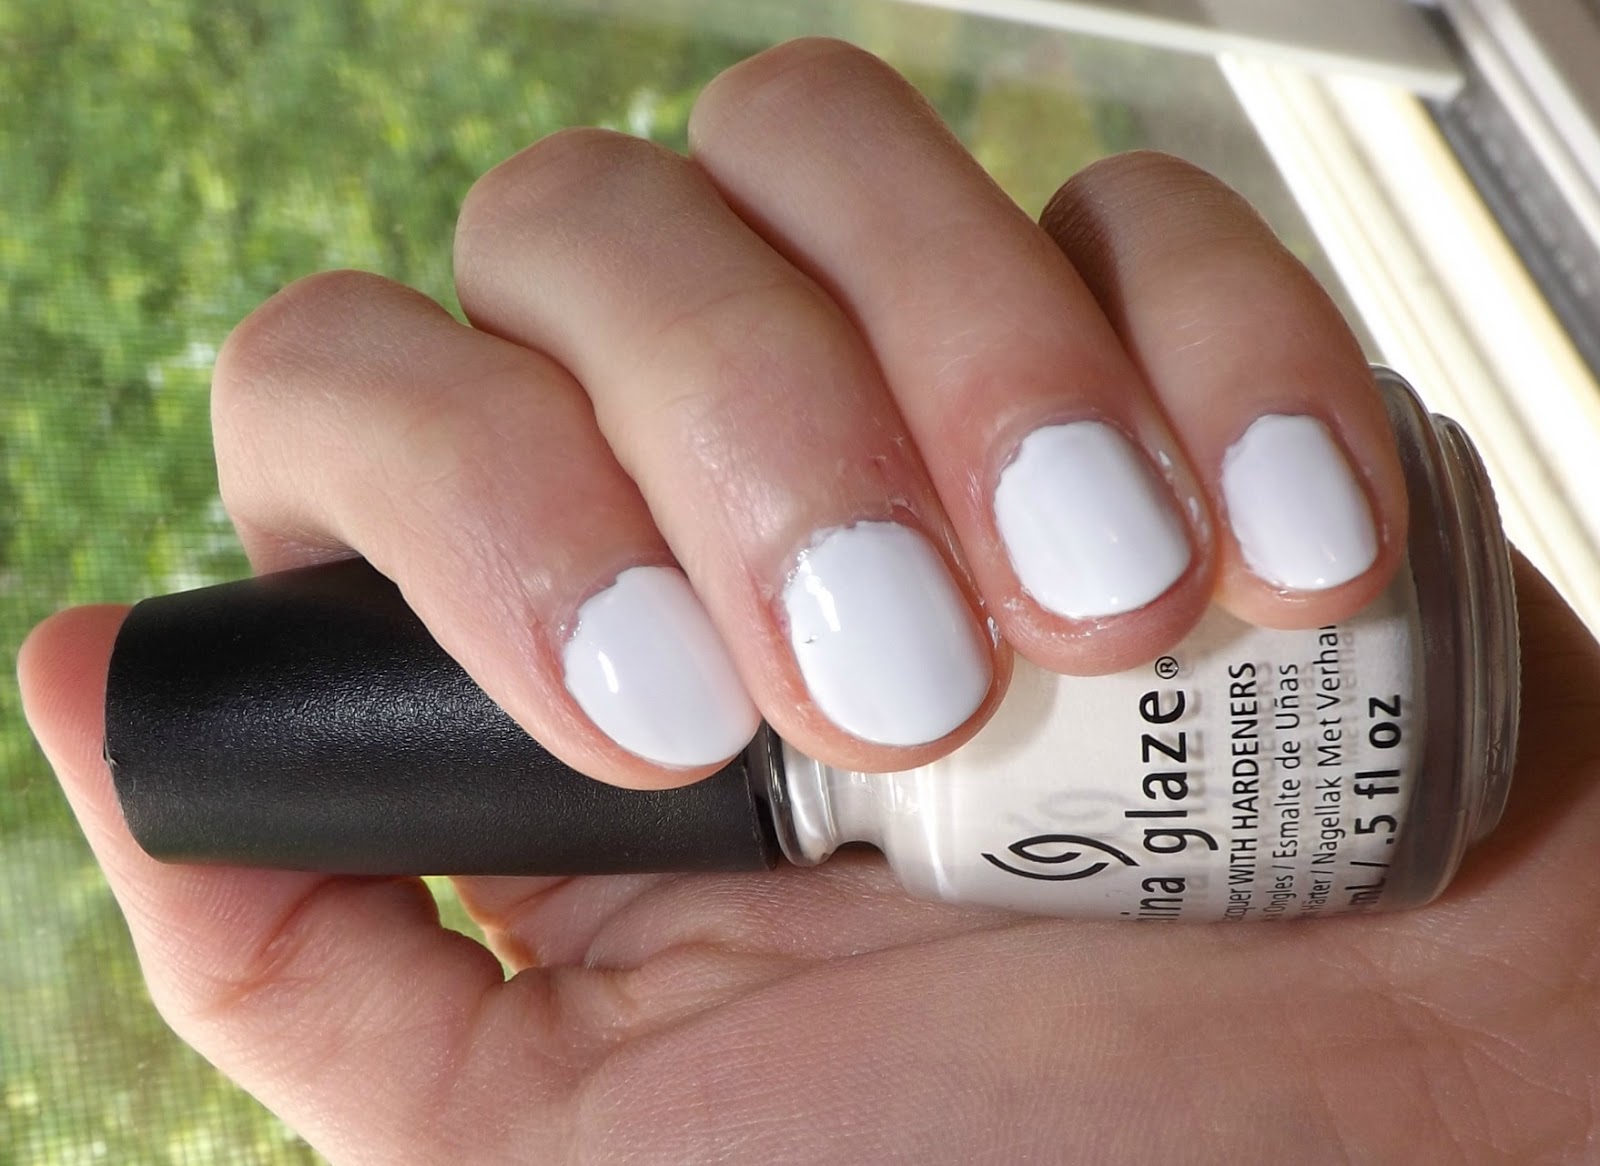 4. China Glaze Nail Lacquer in "White on White" - wide 6